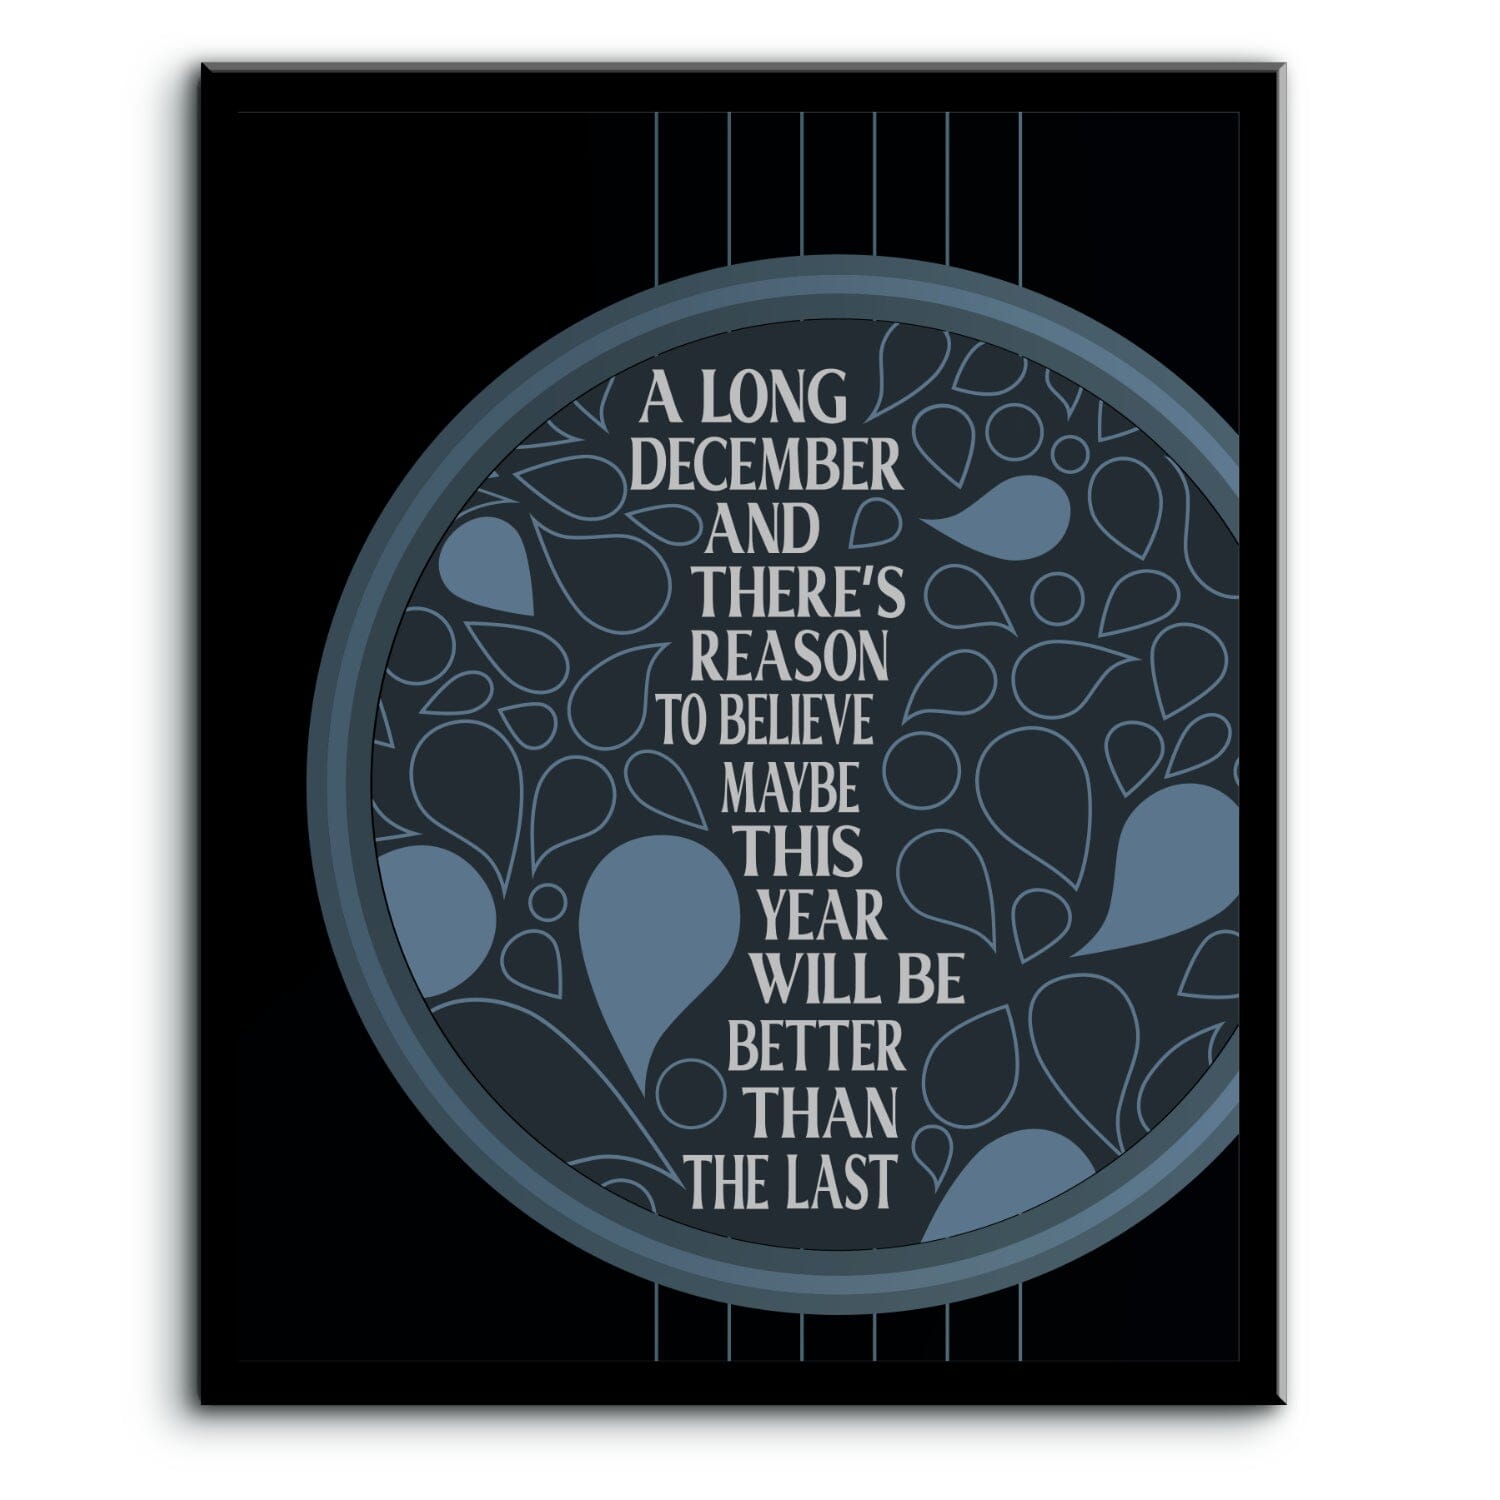 A Long December by the Counting Crows - Song Lyric Print Song Lyrics Art Song Lyrics Art 8x10 Plaque Mount 